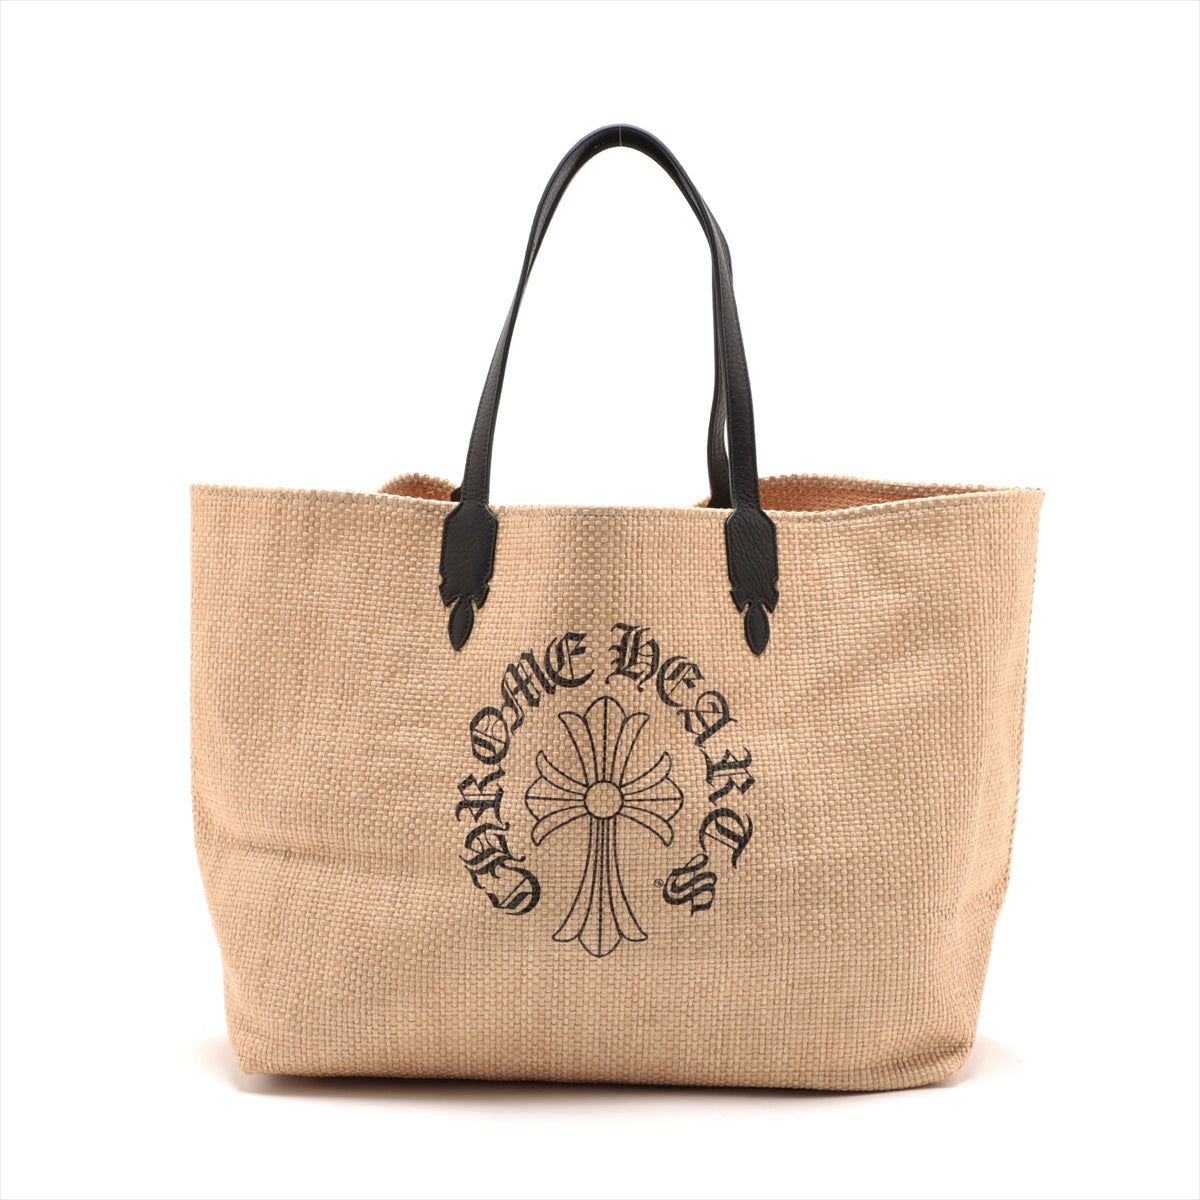 Chrome Hearts Tote bag Unknown material Beige large beach bag